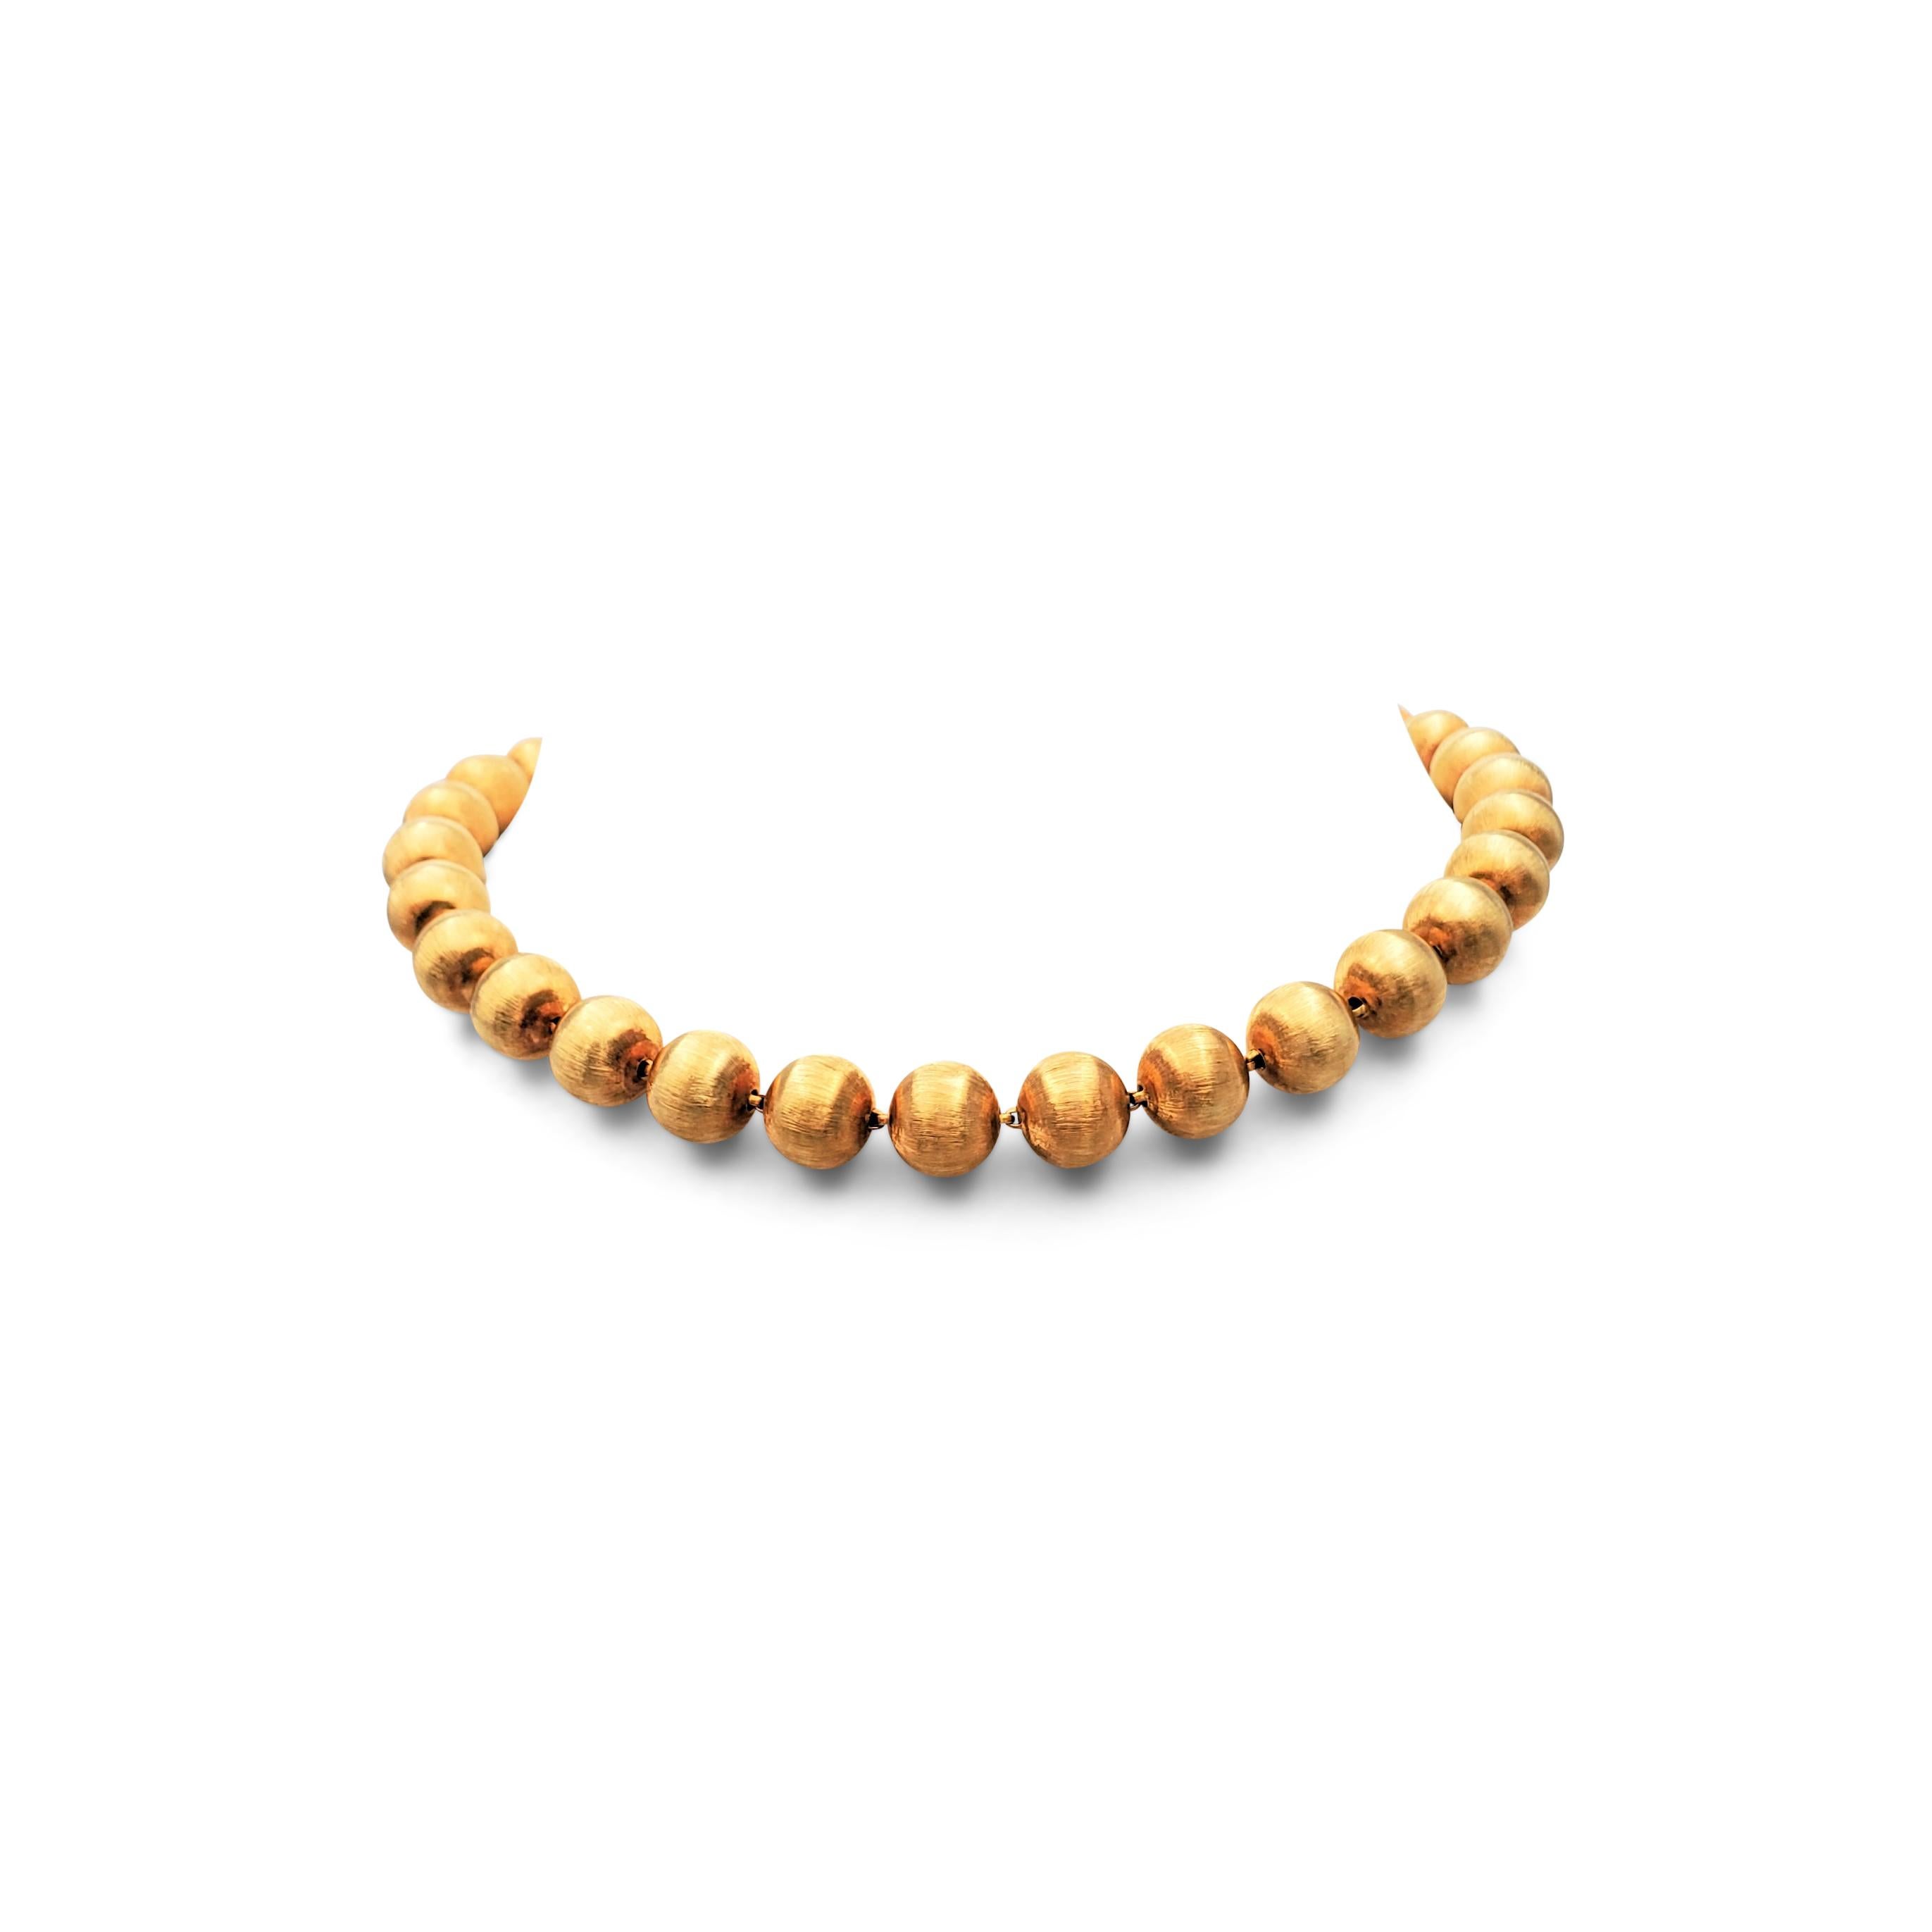 Authentic Buccellati 'Rigato' convertible necklace composed of 18 karat yellow gold beads with a lustrous florentine finish. Signed M. Buccellati, Italy, 750. The necklace converts into two bracelets measuring 8 1/2 inches and 9 3/4 inches